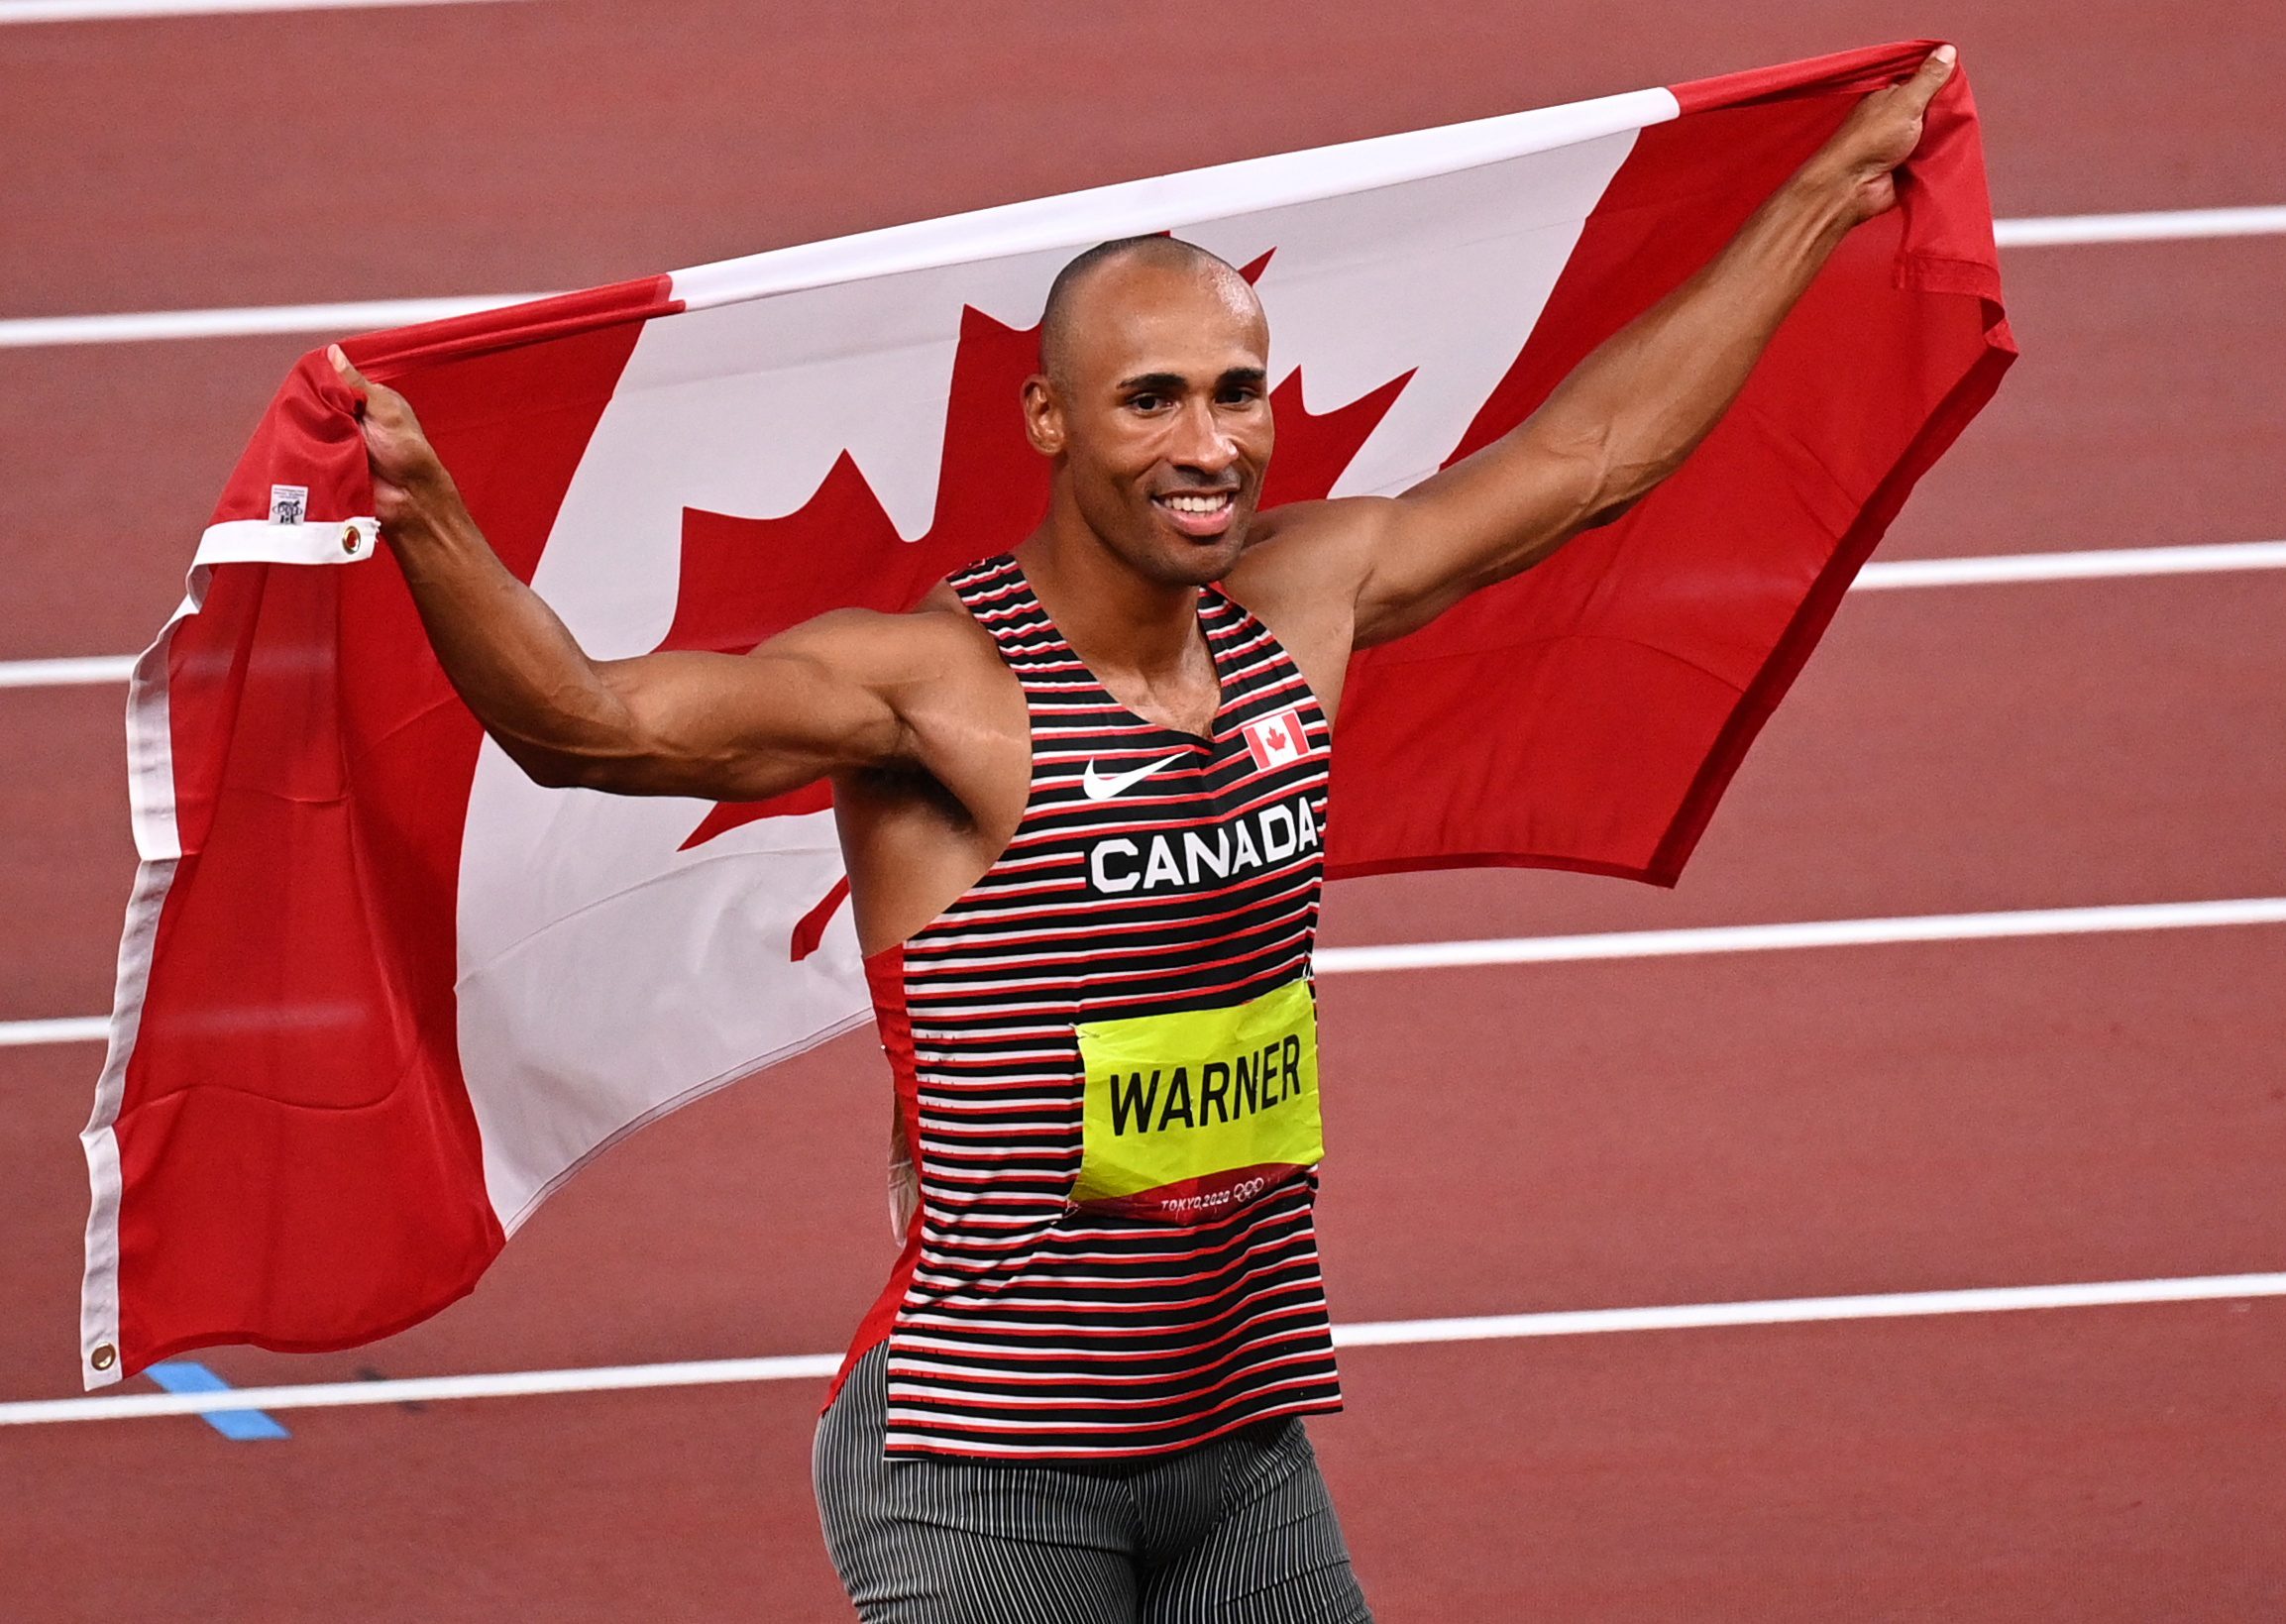 Canada’s Warner breaks Olympic record on way to decathlon gold